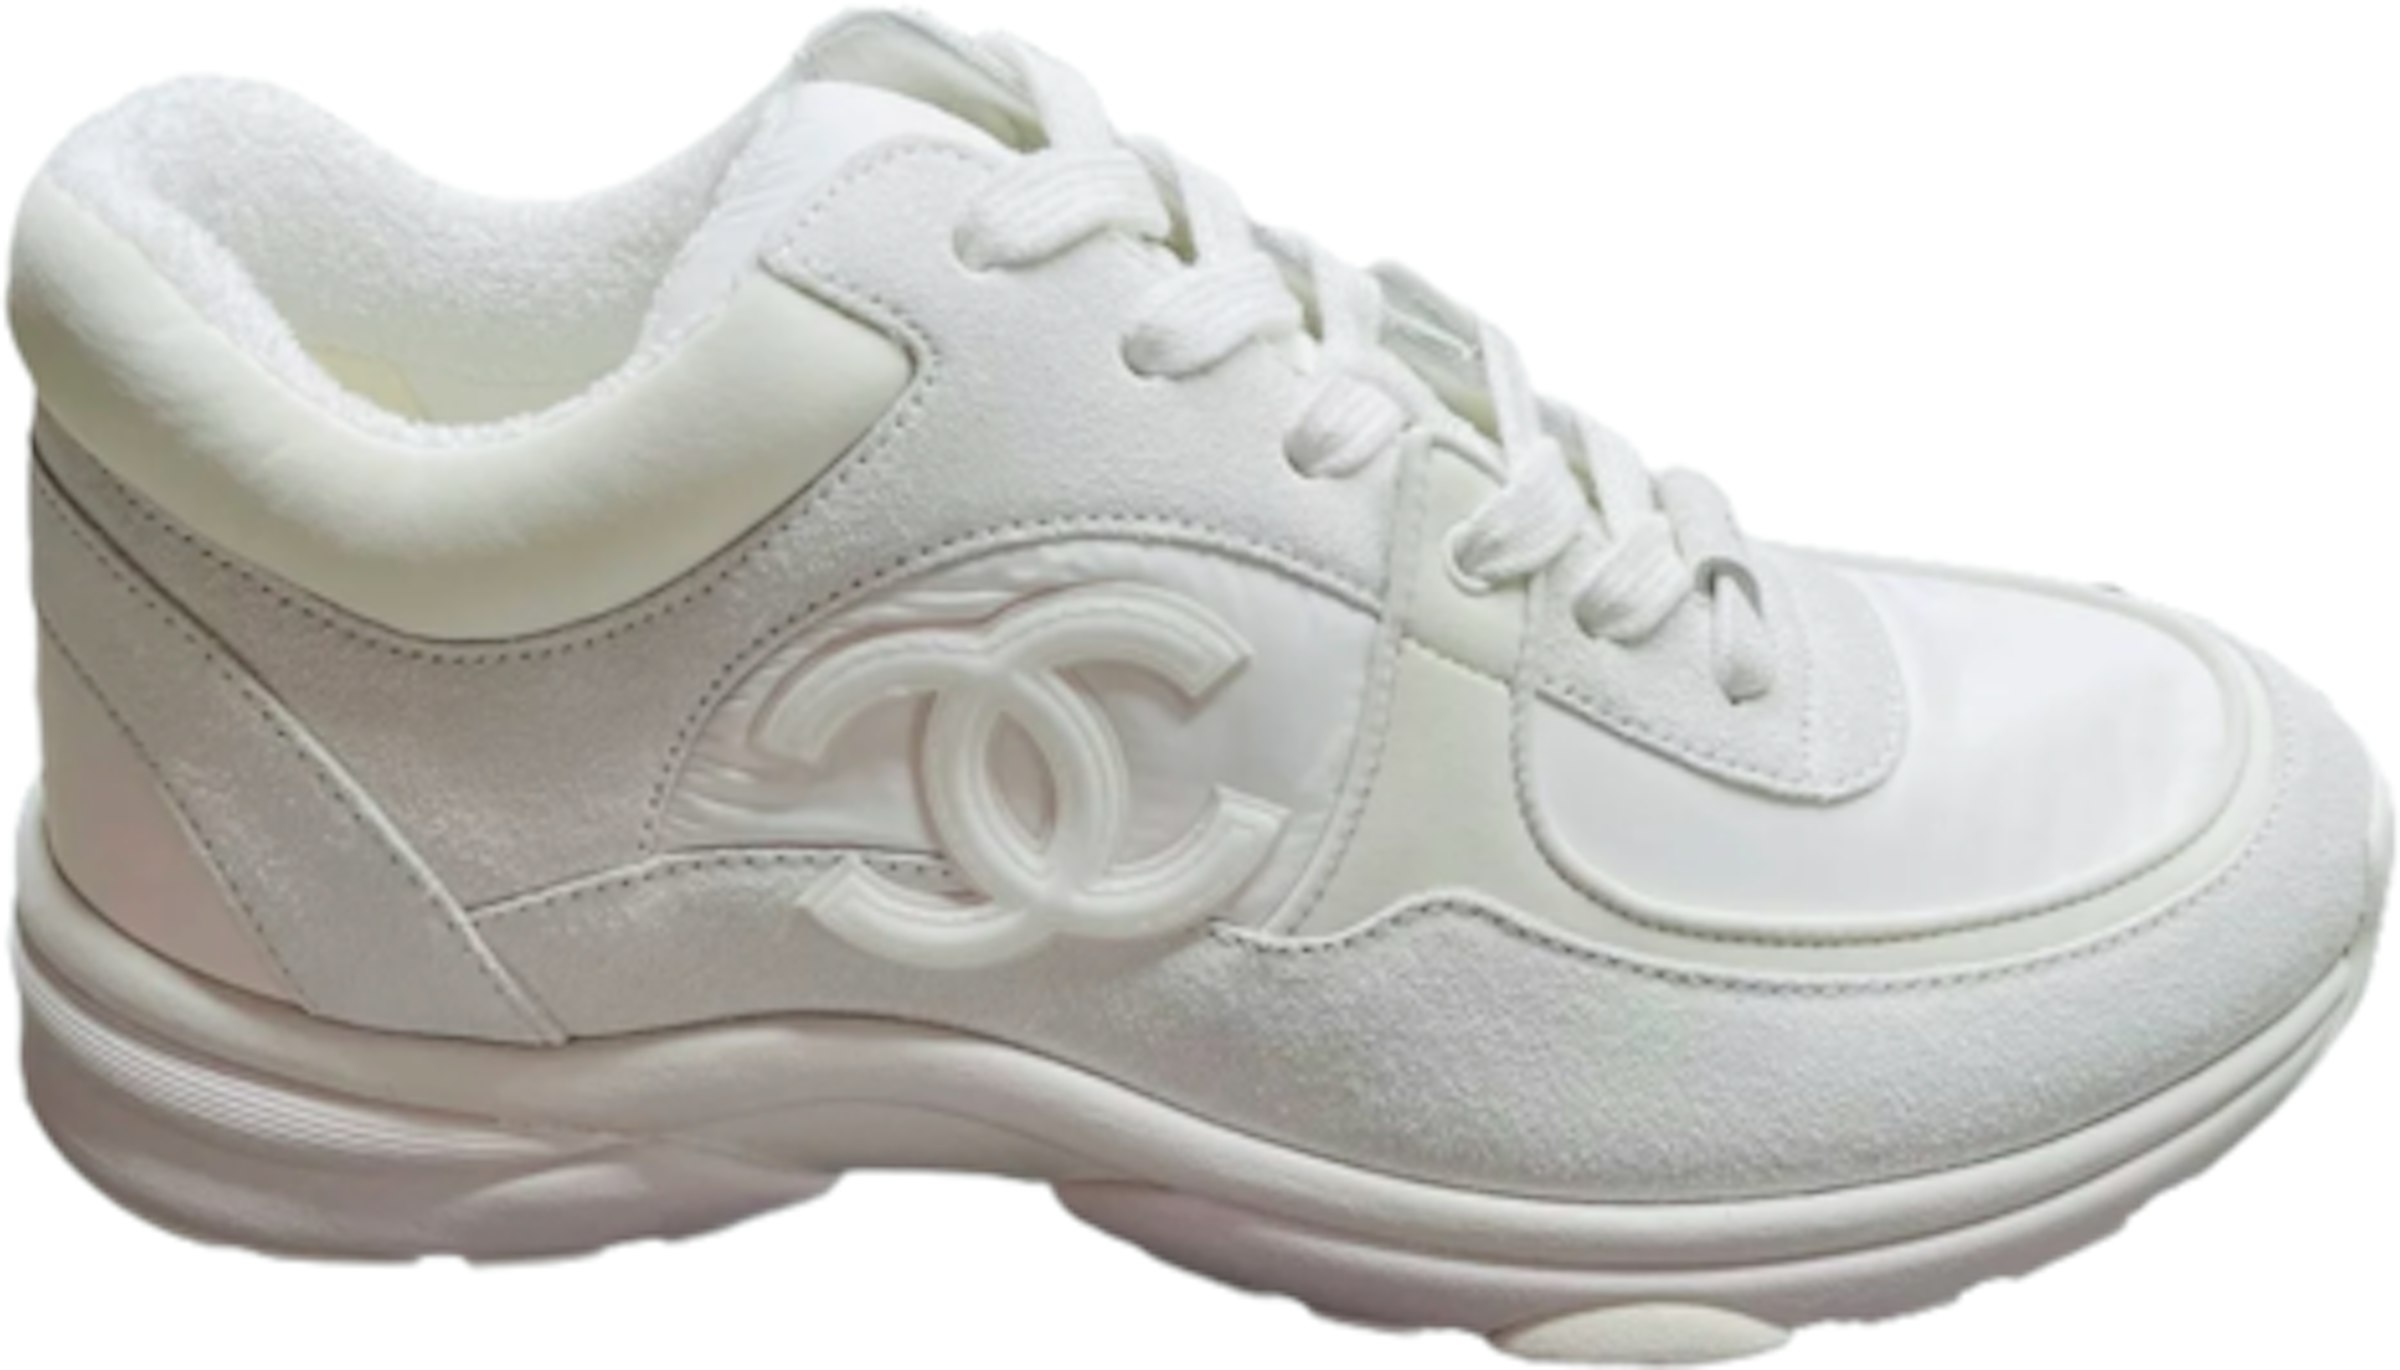 Chanel Low Top Trainer Reflective White Suede - G34360 0I259 - US